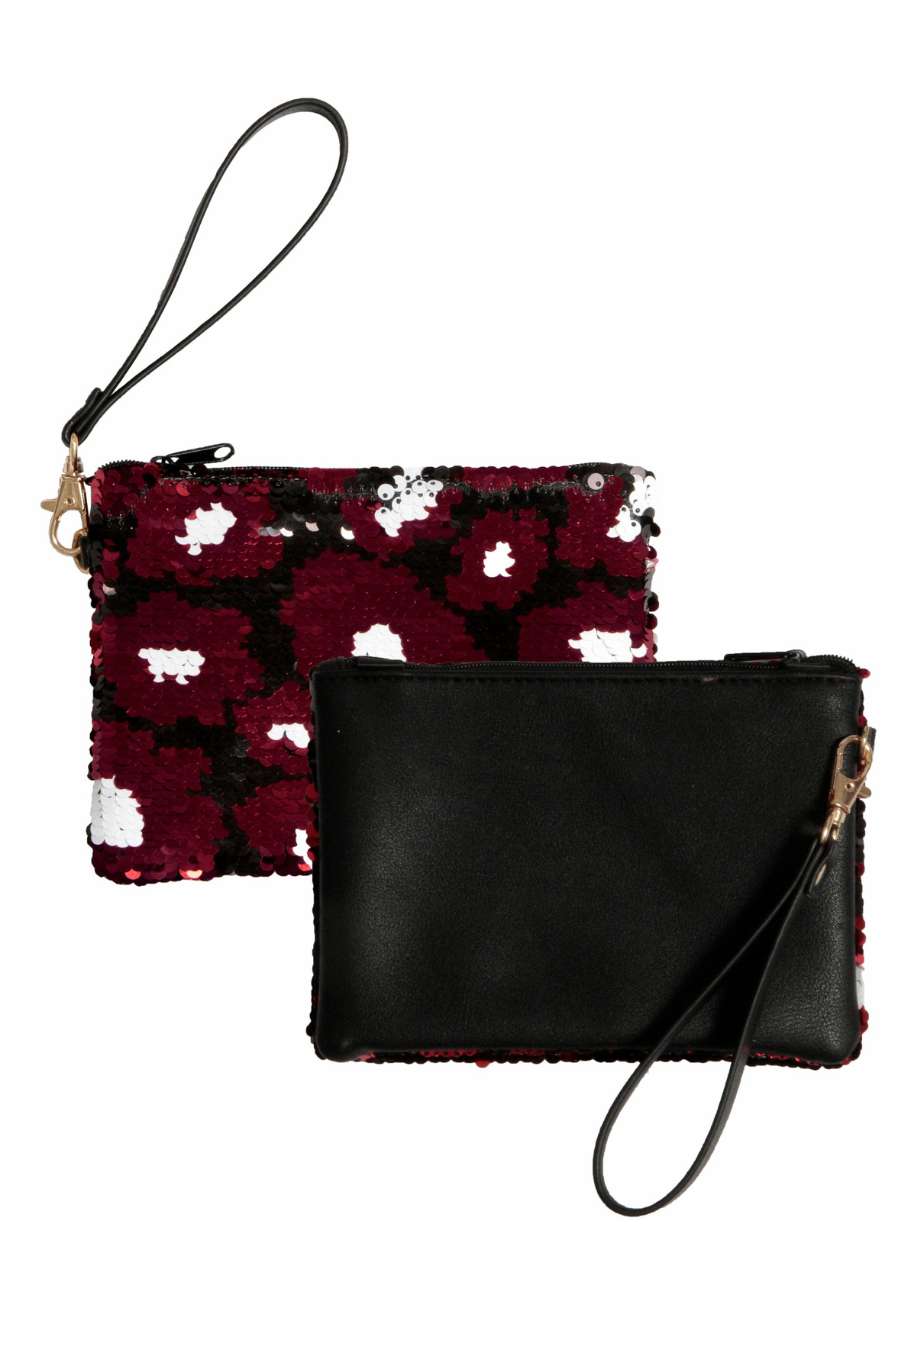 TOO CHIC REVERSIBLE SEQUIN WRISTLET IN MAROON AND BLACK